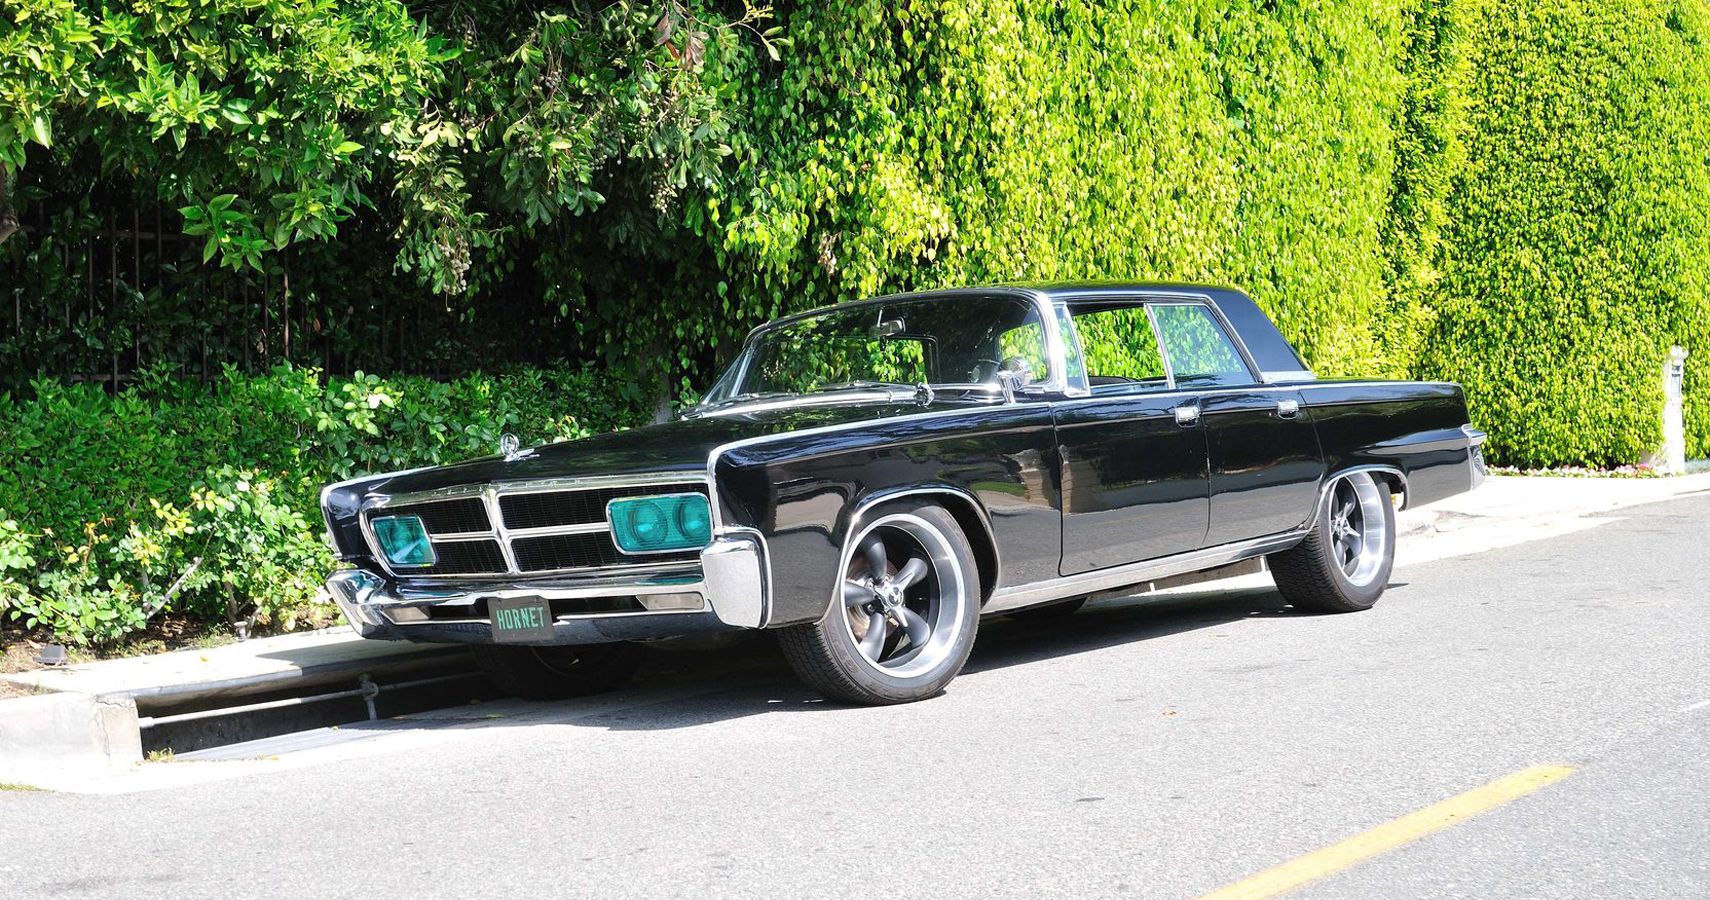 8 Features That Make The 1965 Chrysler Imperial An Underrated Classic